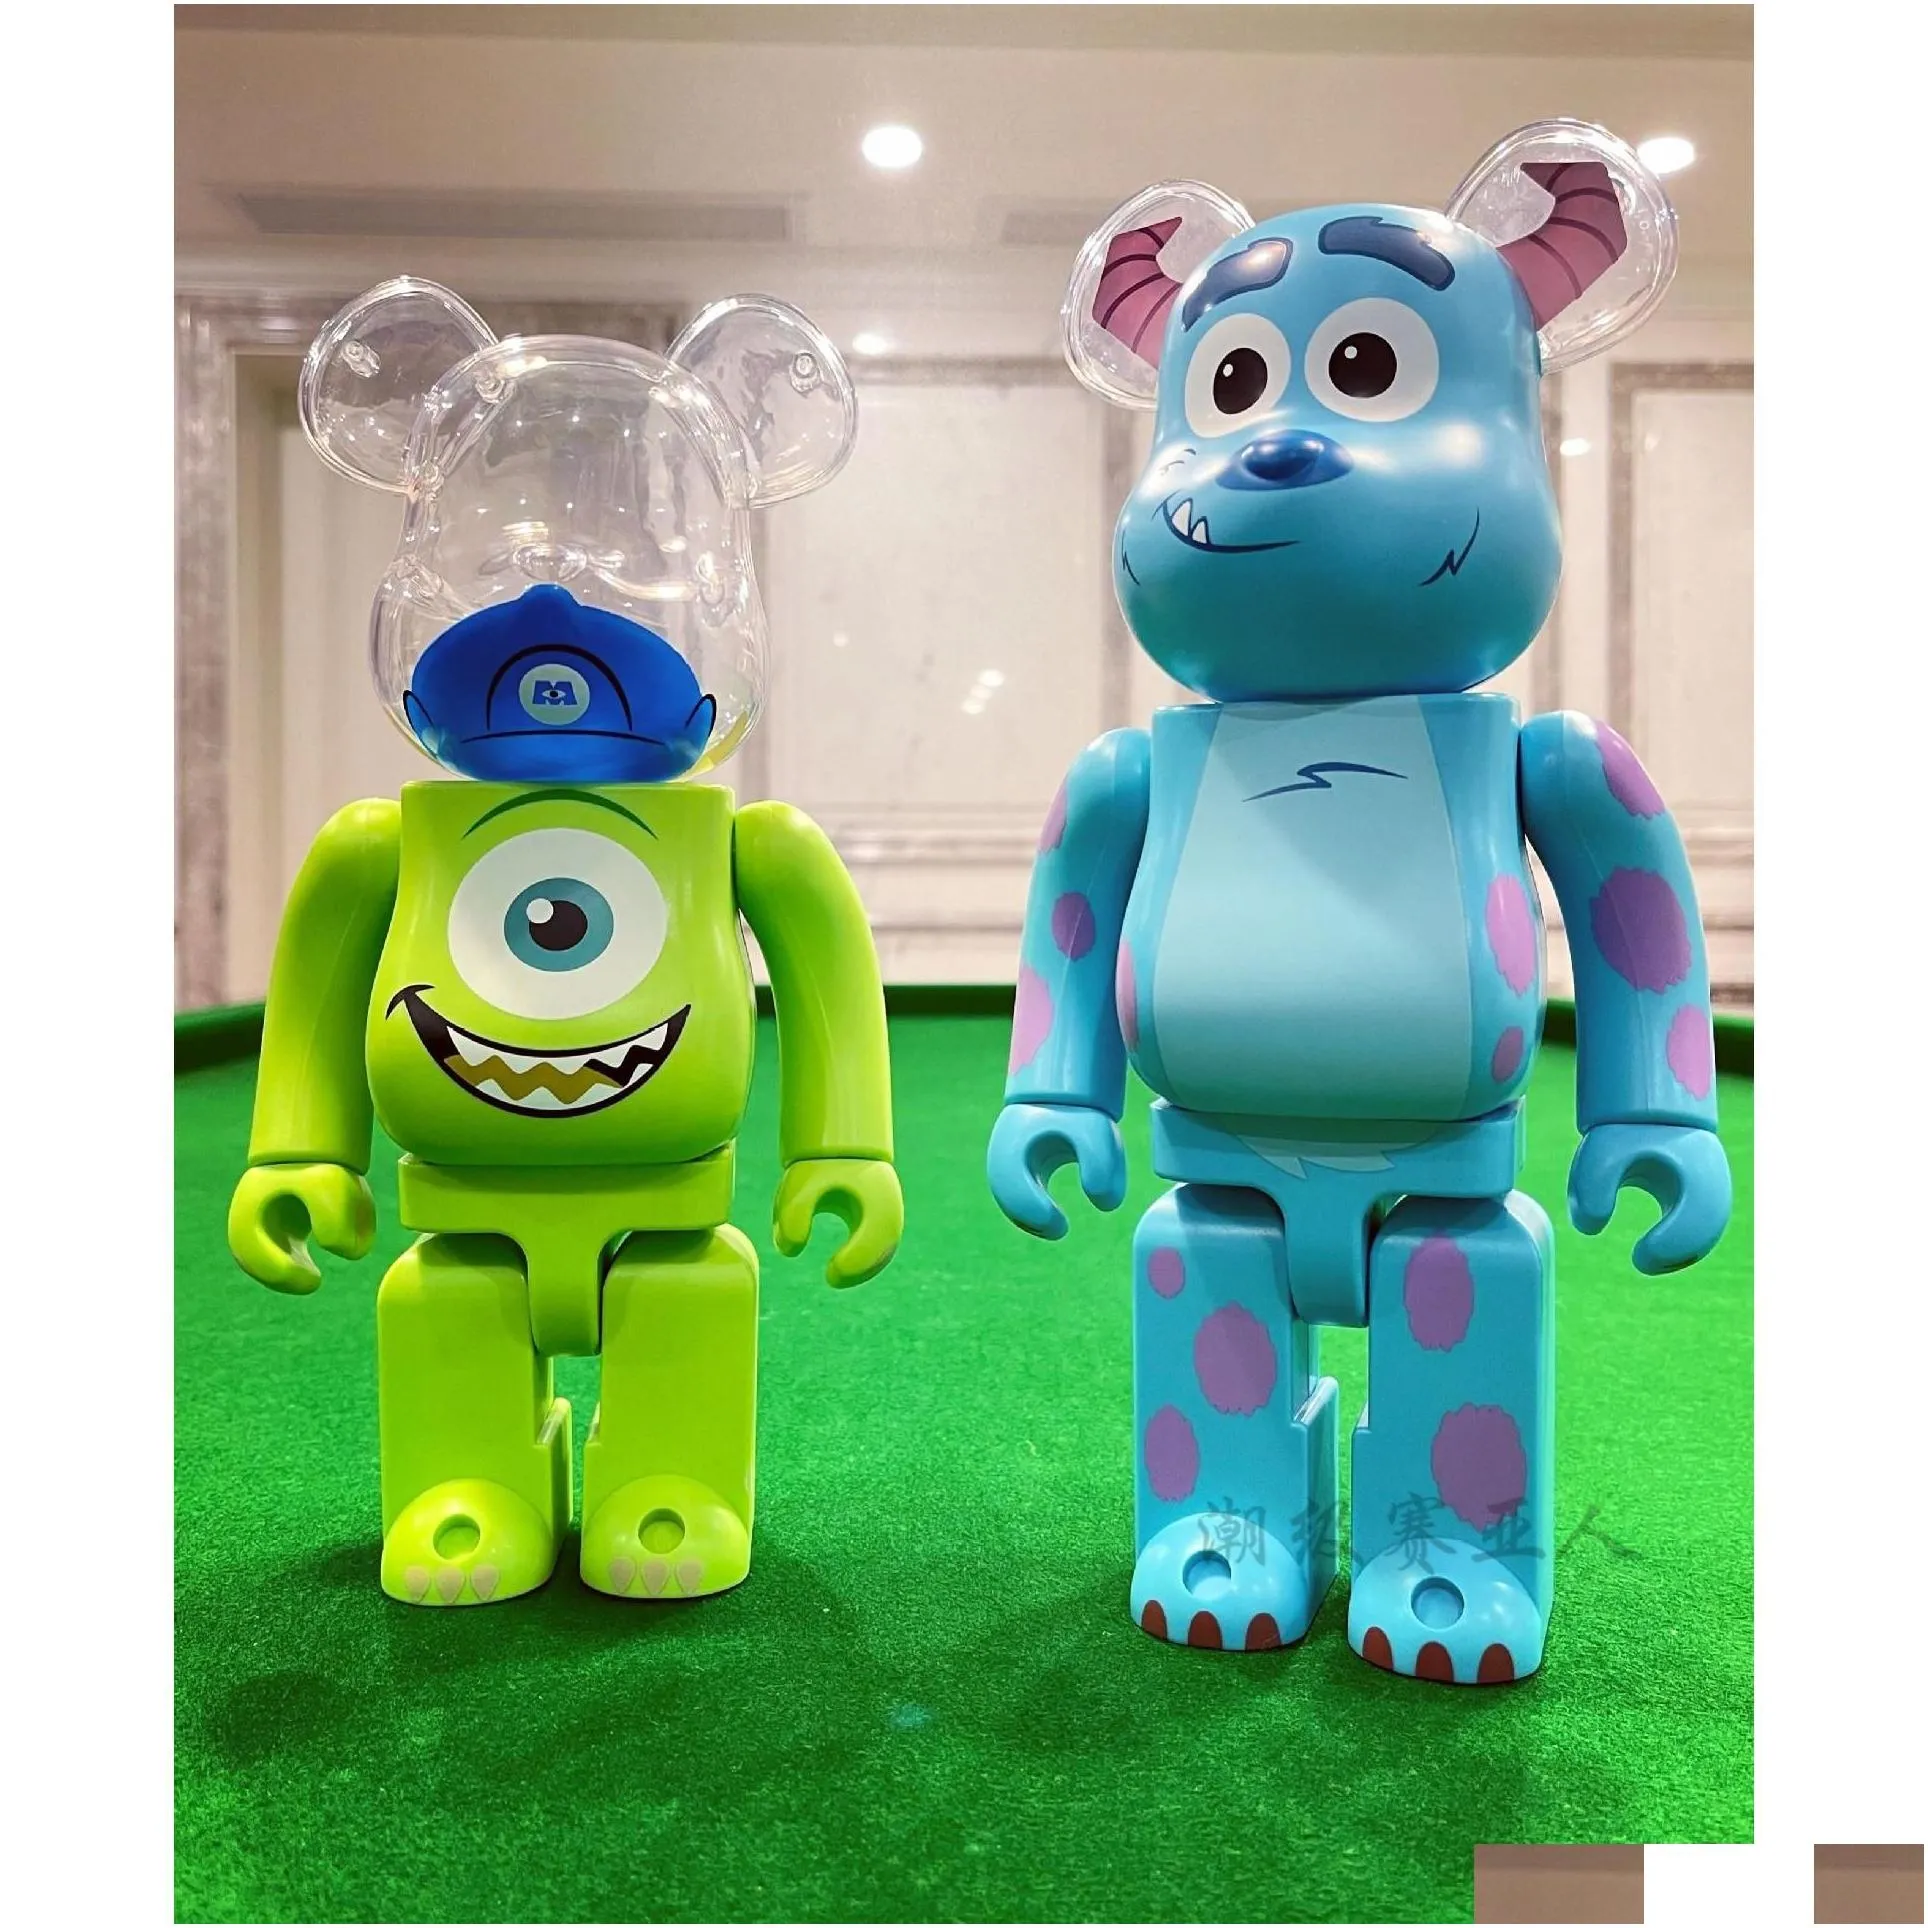 action toy figures 400 bearbrick pvc figure cosplay one big eye sley collections bearbricklys 28cm joints sounds drop delivery toys